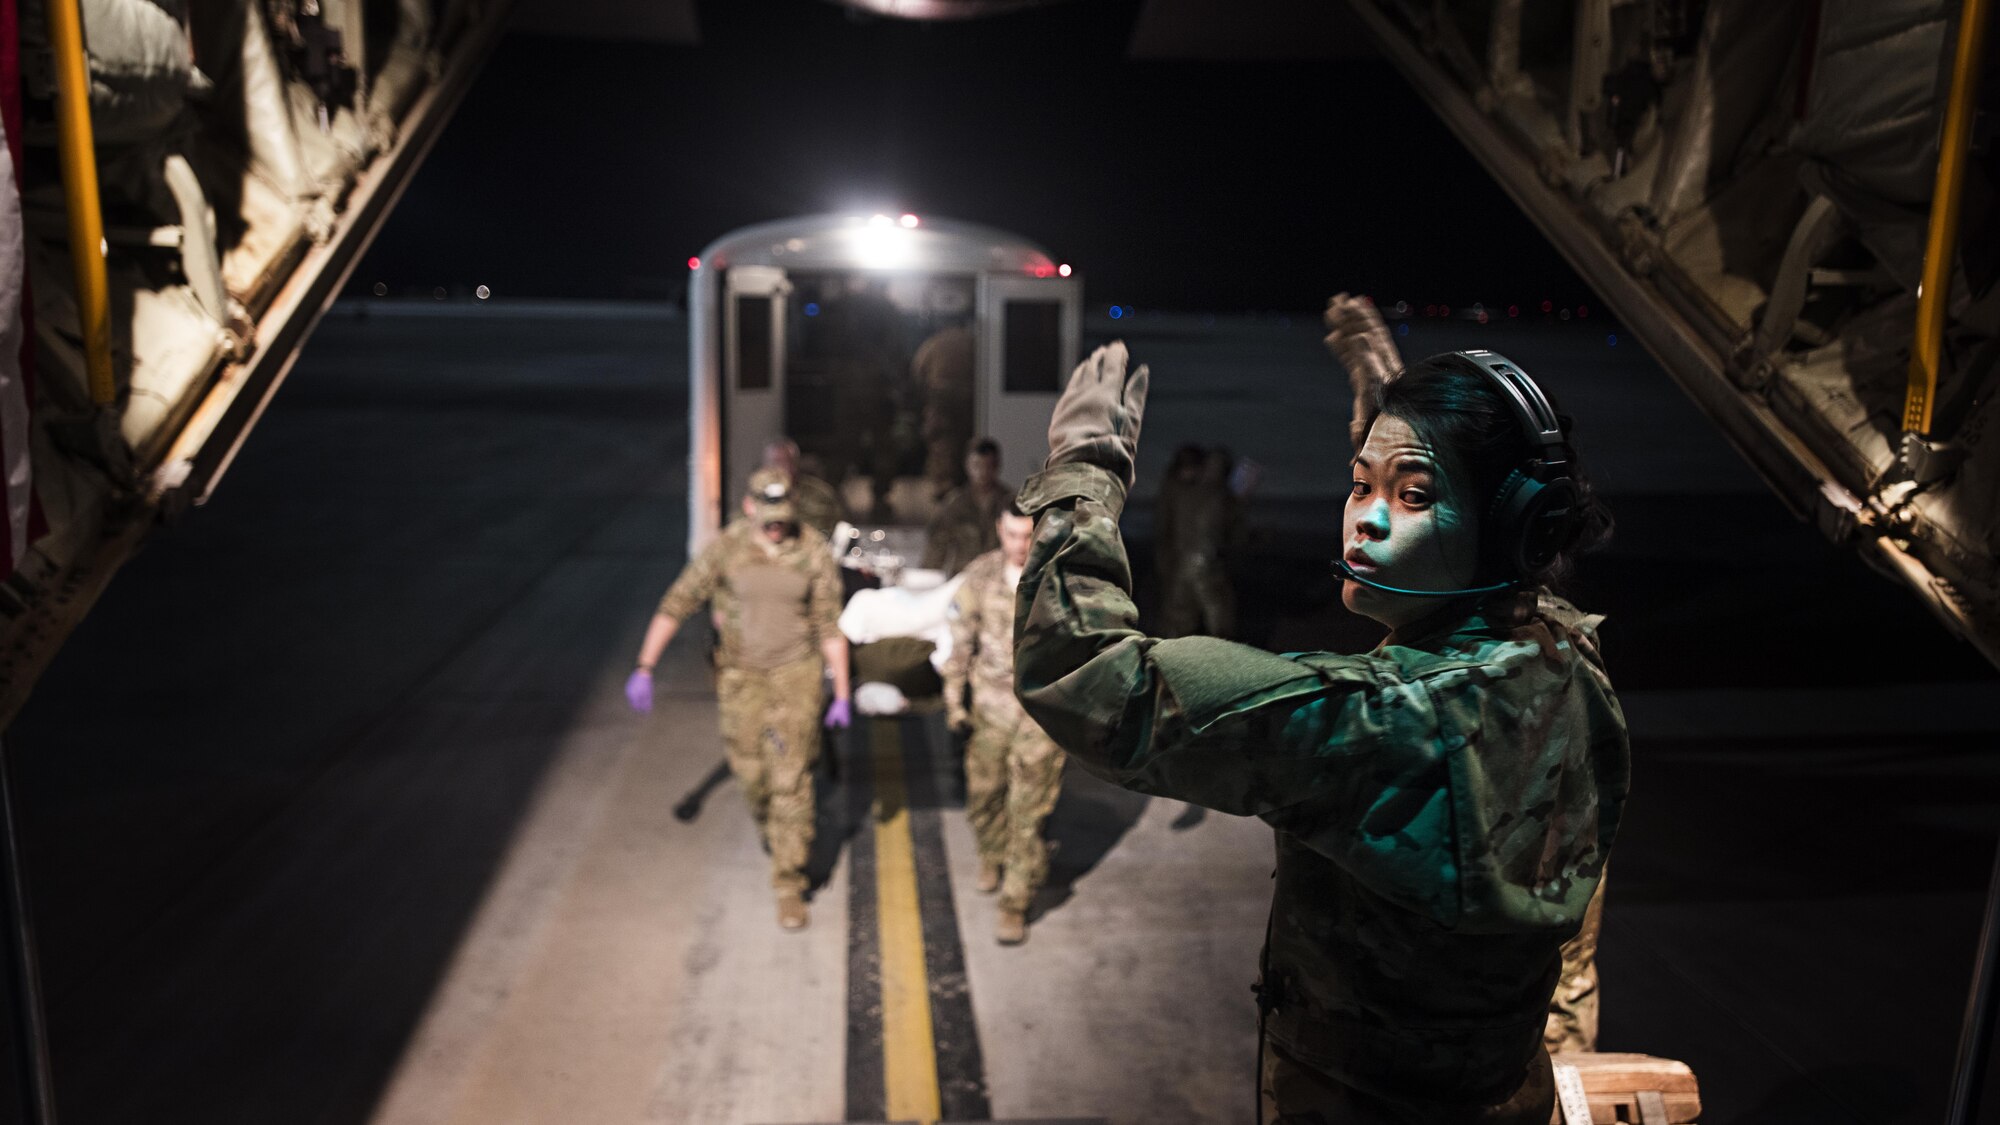 1st Lt. Sarah Jun, 455th Aeromedical Evacuation Squadron flight nurse, directs litter carriers bringing a patient onboard a C-130J Hercules to transport him from Kandahar Regional Military Hospital, Kandahar Airfield, to the Craig Joint Theater Hospital, Bragram Airfield, Afghanistan Feb. 22, 2017. The 455th EAES creates and operates a portable intensive care unit aboard aircraft that enables them to transport critically injured or ill patients to a higher level of care. (U.S. Air Force photo by Staff Sgt. Katherine Spessa)